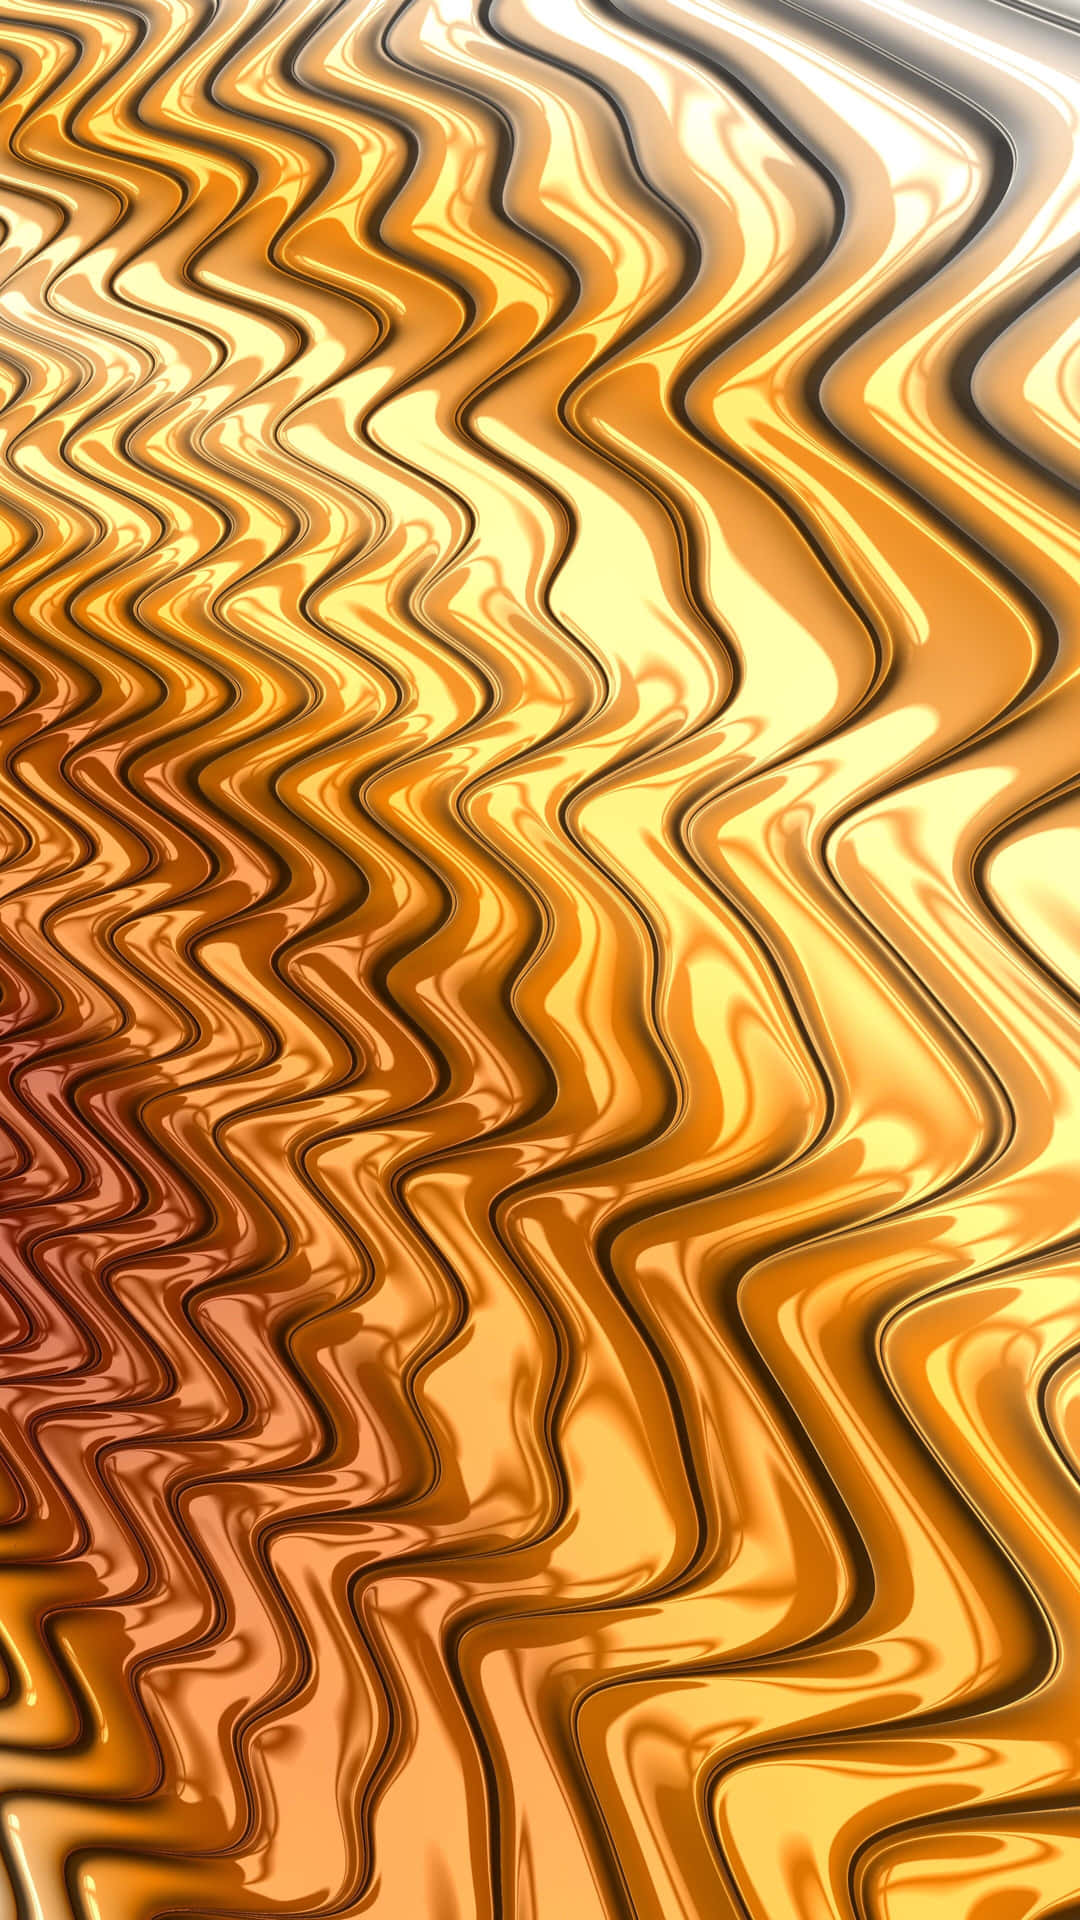 A Golden Abstract Background With Waves